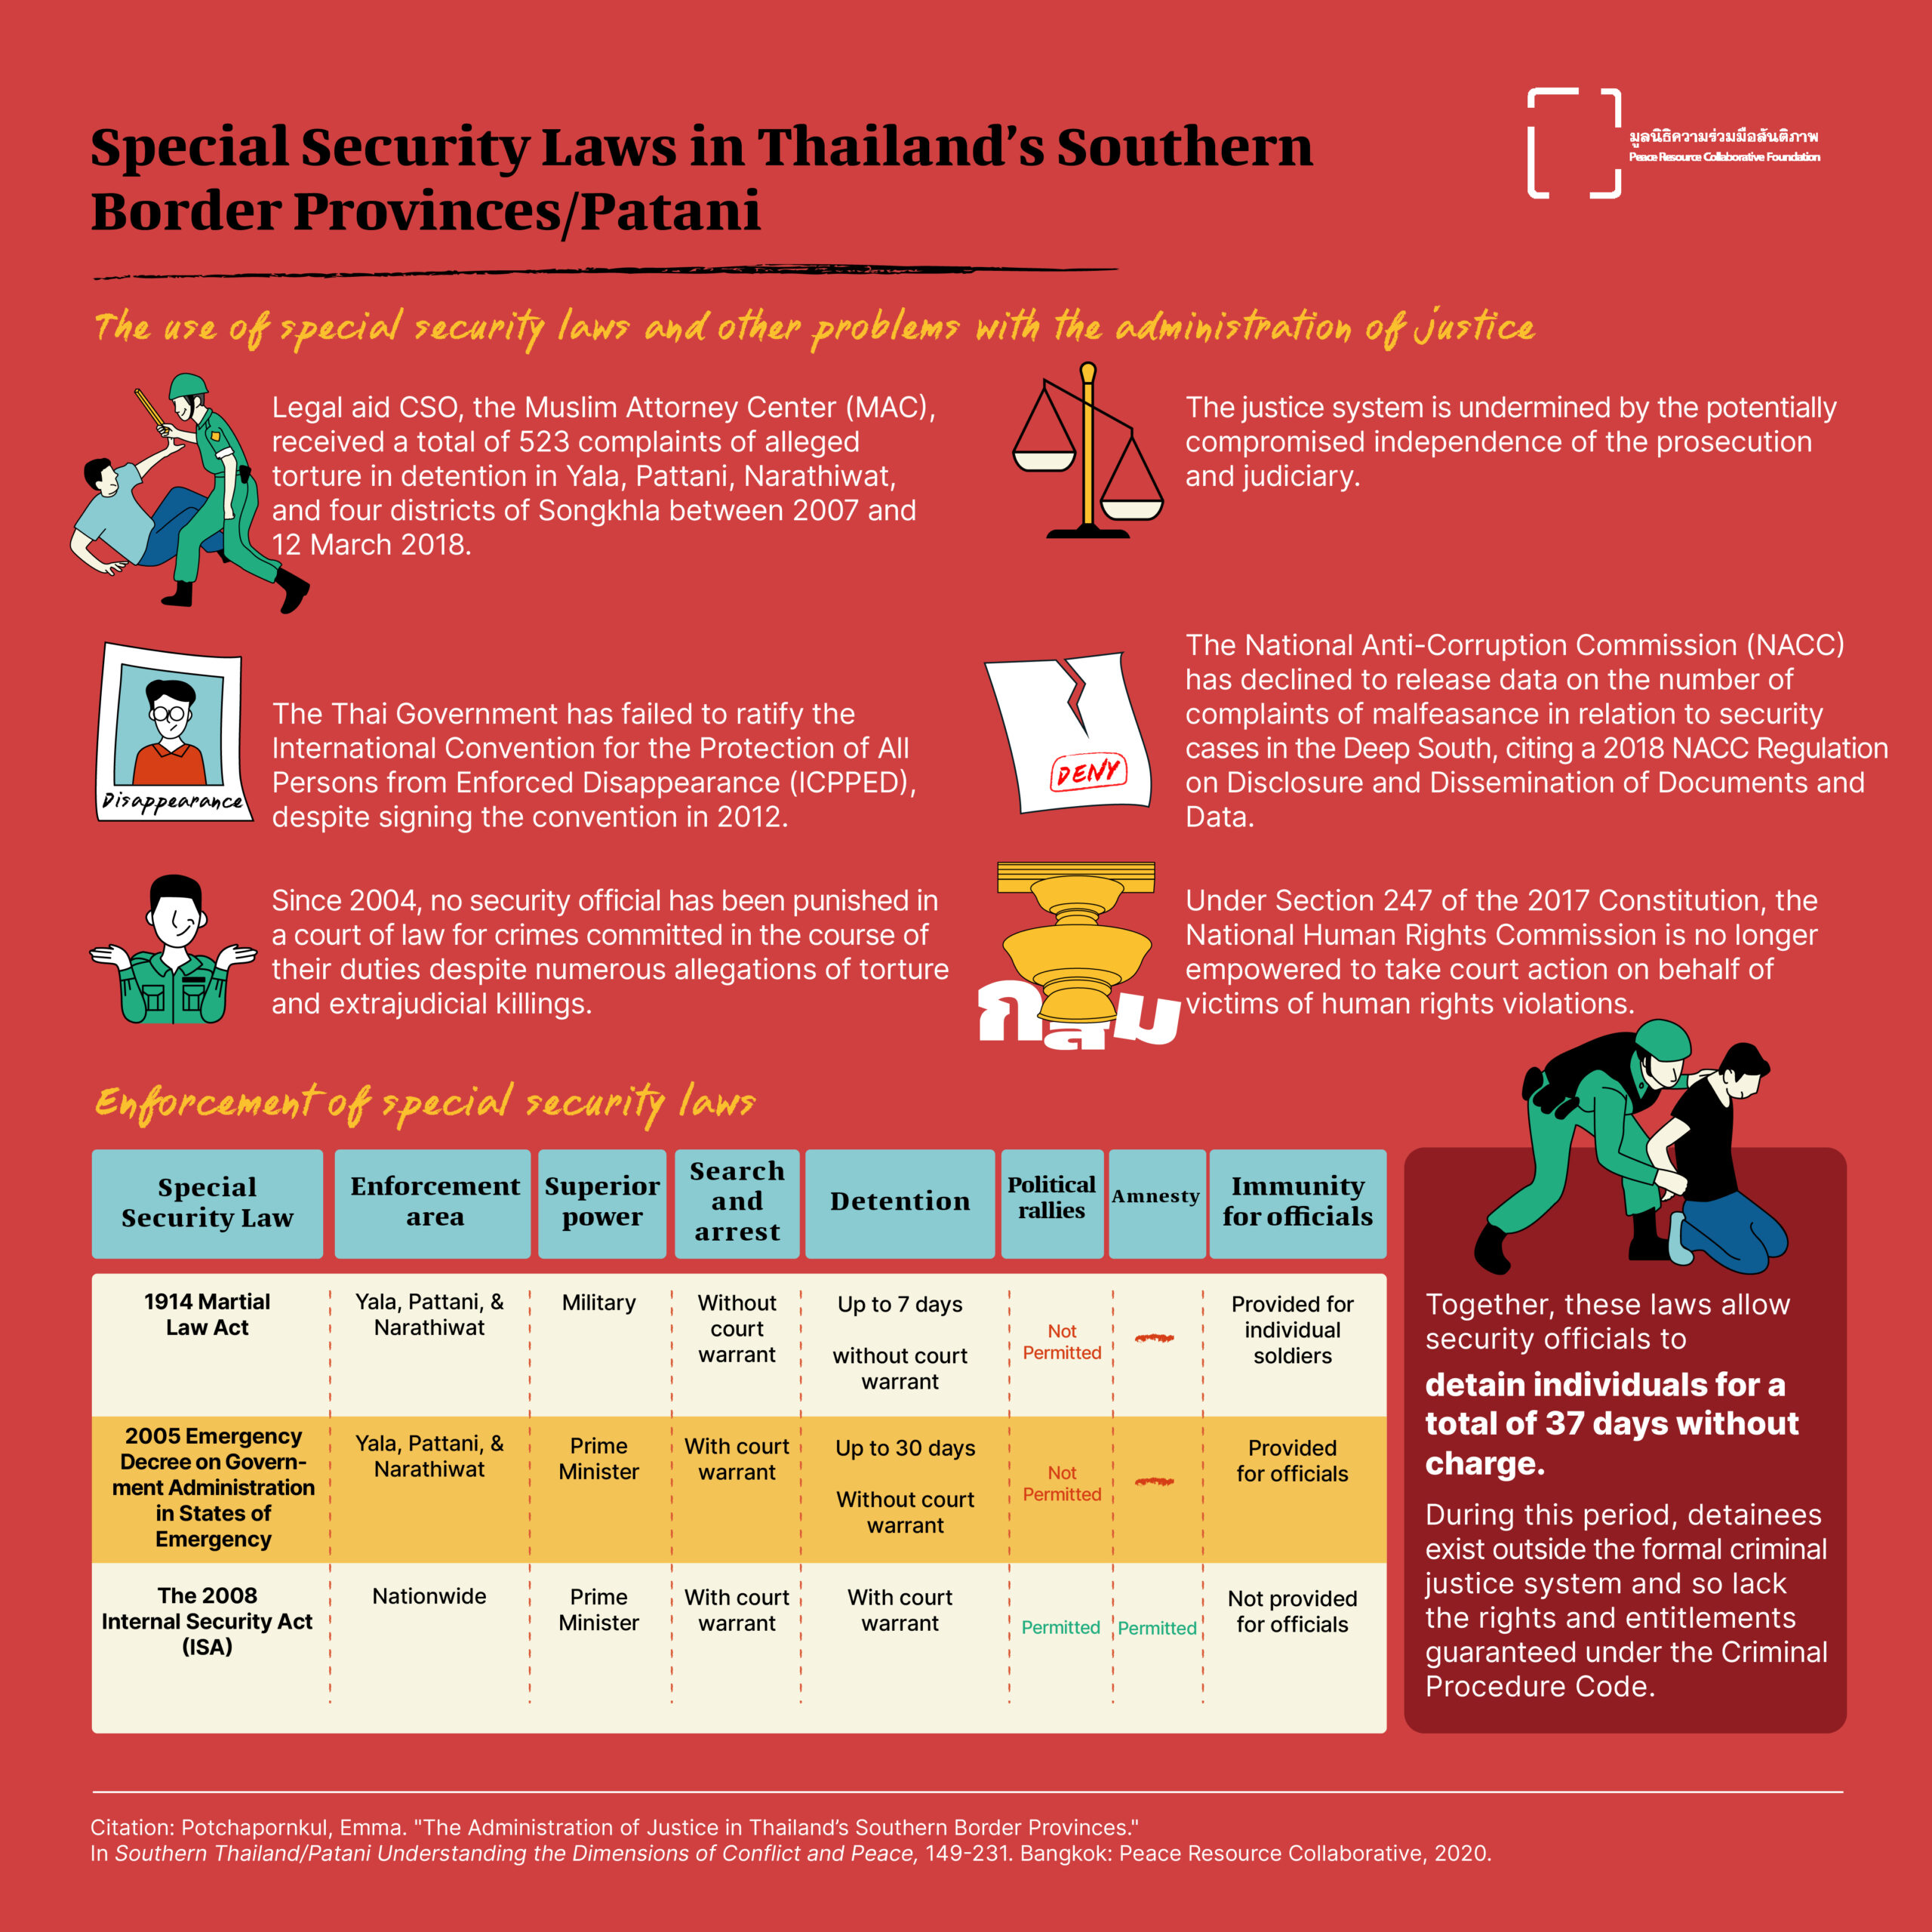 Special Security Law in Thailand's Southern Border Provinces/Patani